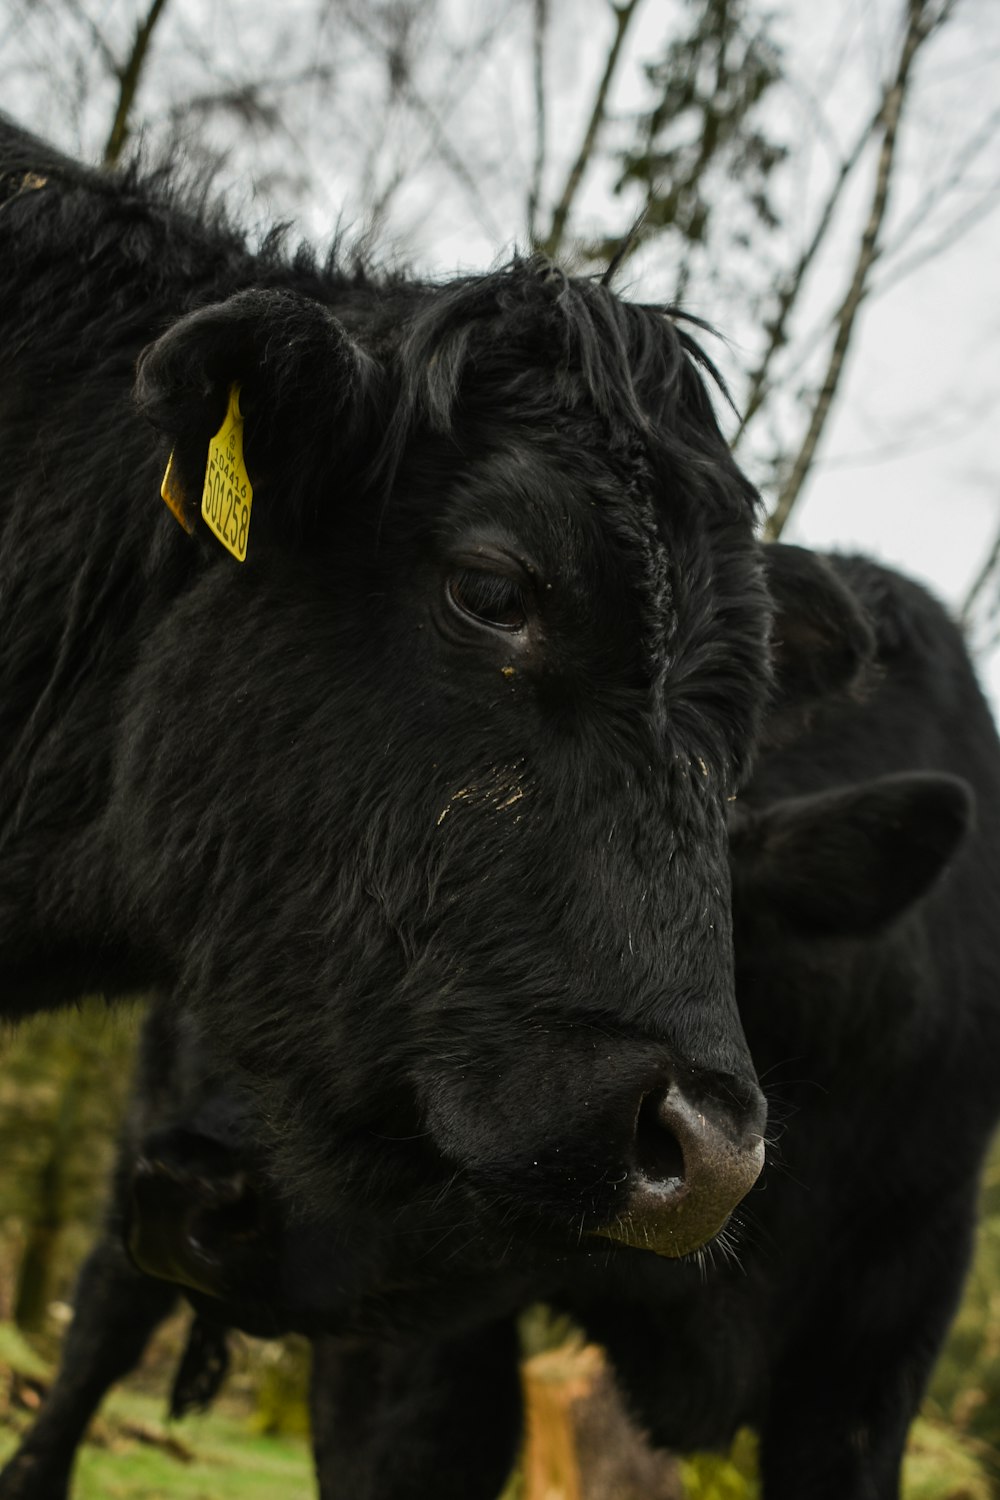 a close up of a black cow with a yellow tag on it's ear